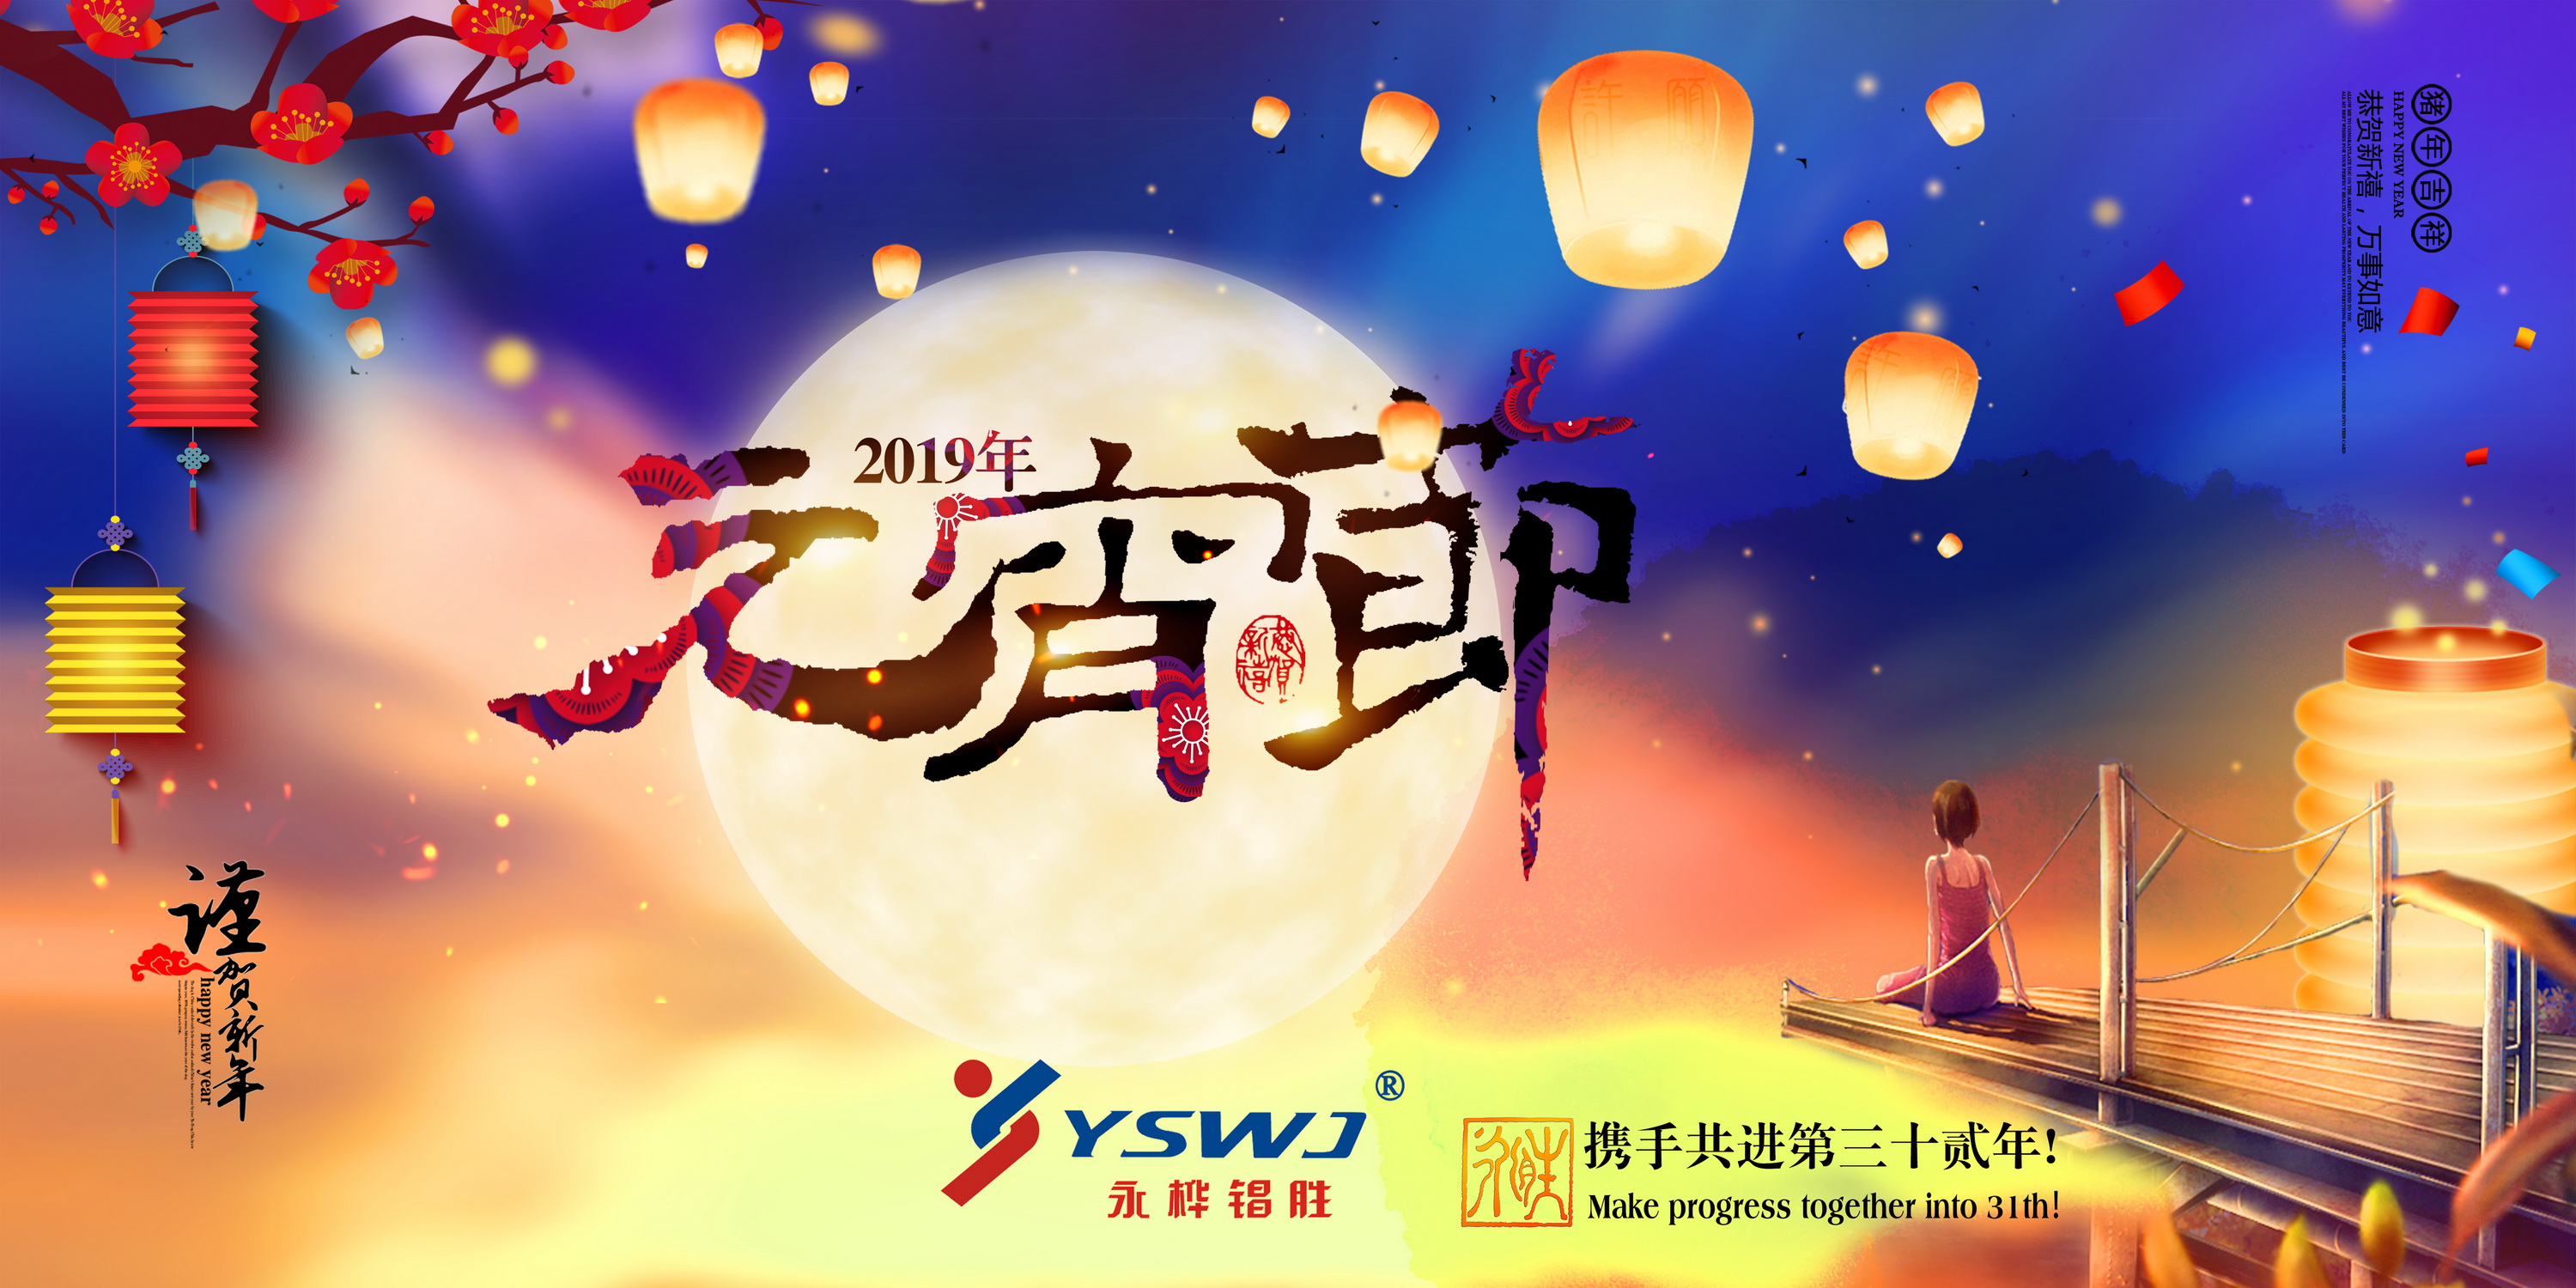 【Lantern Festival】Happy Lantern Festival to new and old customers